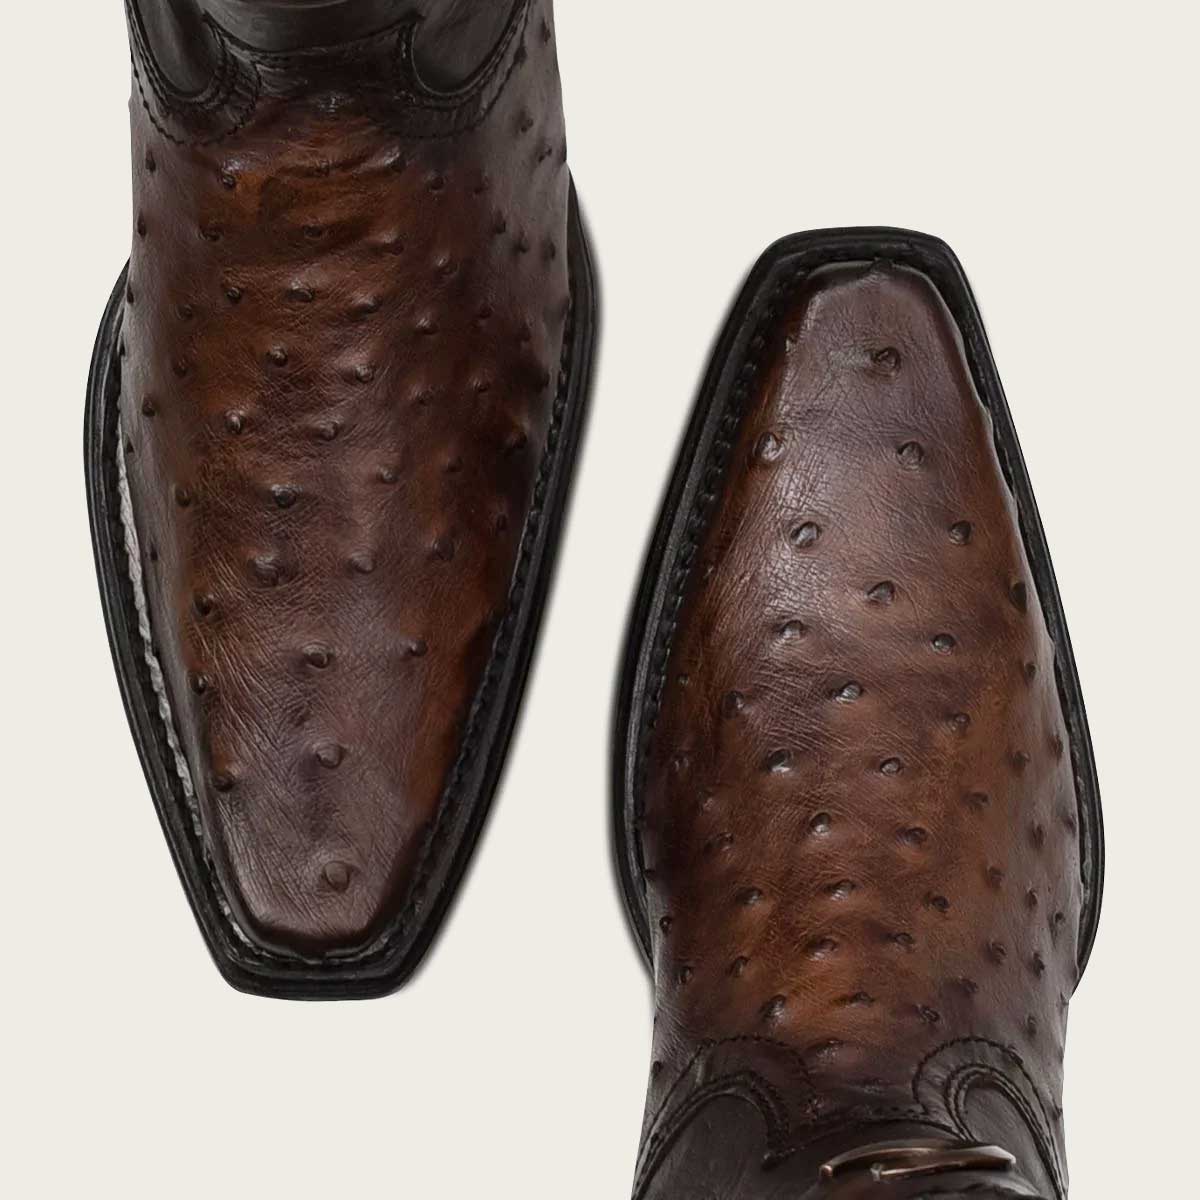 Stylish men's dark brown leather boots with intricate laser-engraved details and expert craftsmanship